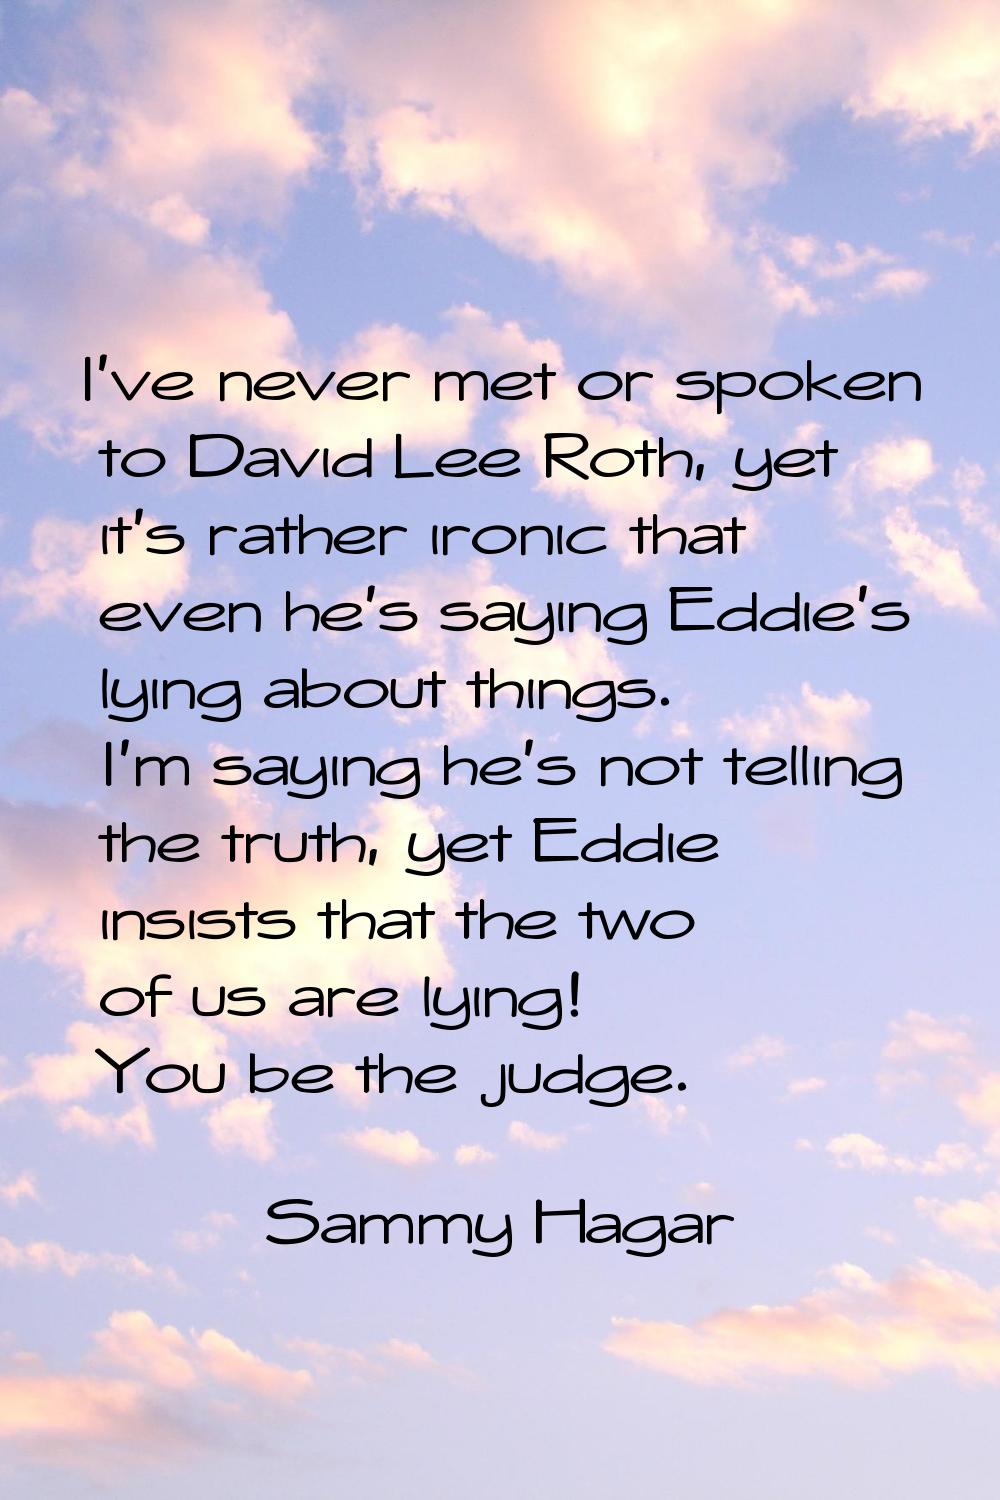 I've never met or spoken to David Lee Roth, yet it's rather ironic that even he's saying Eddie's ly